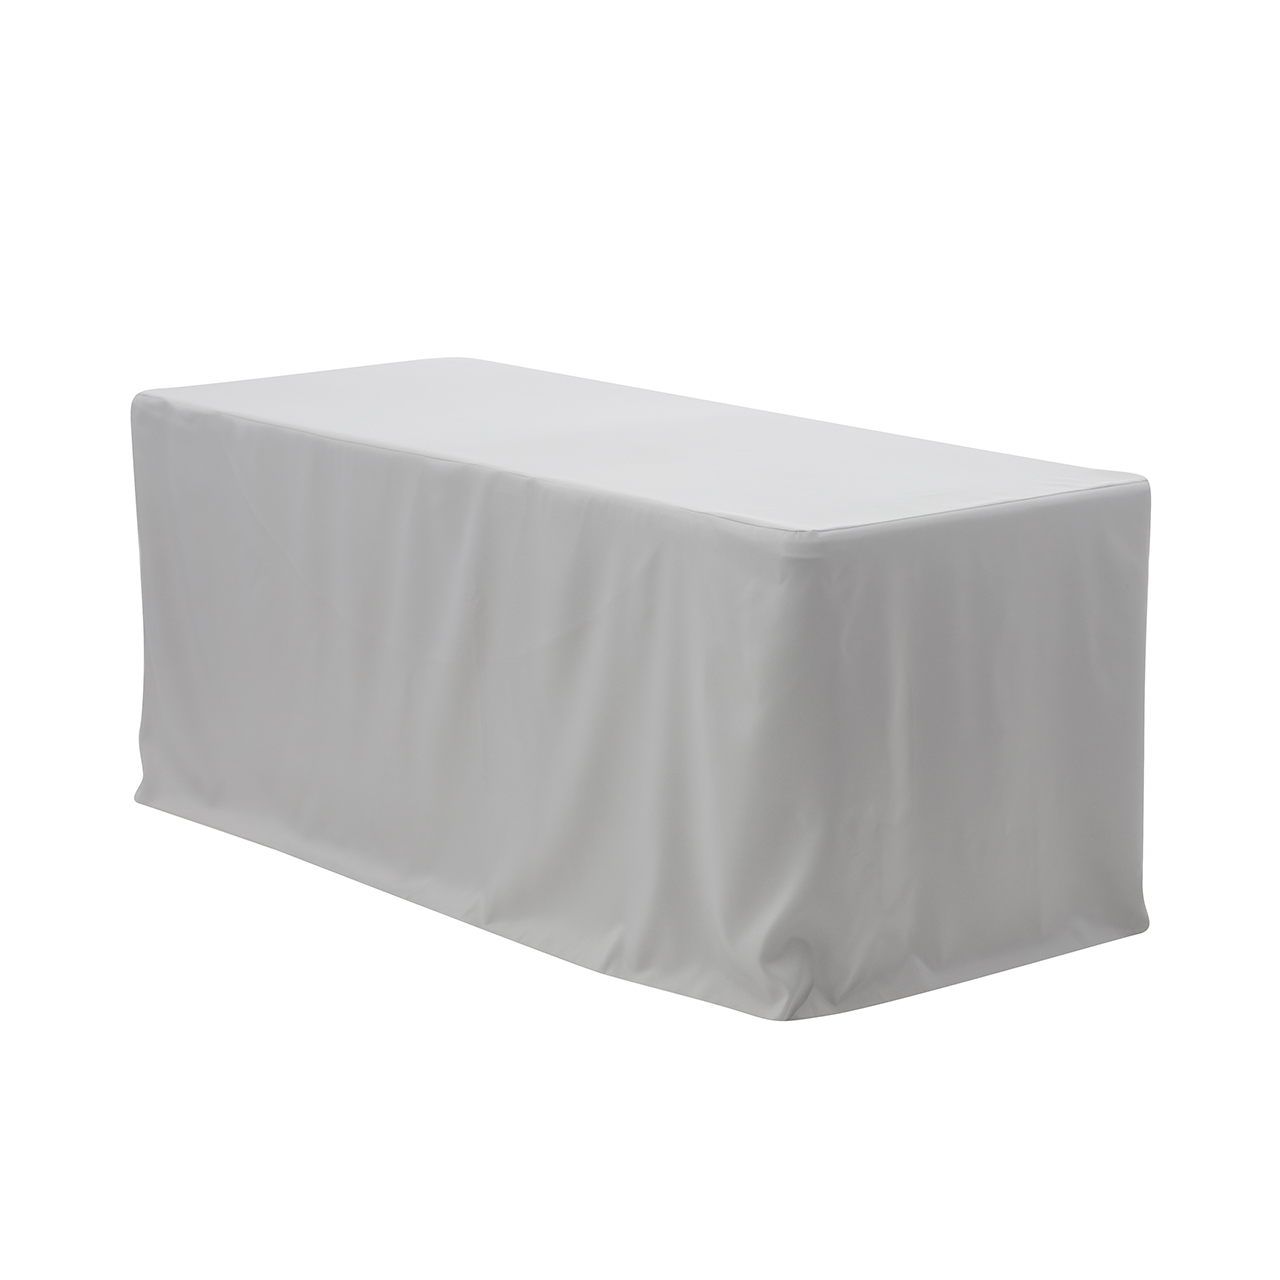 6 ft CHARCOAL GREY FITTED POLYESTER TABLE COVER Tablecloths Wedding Tradeshow 